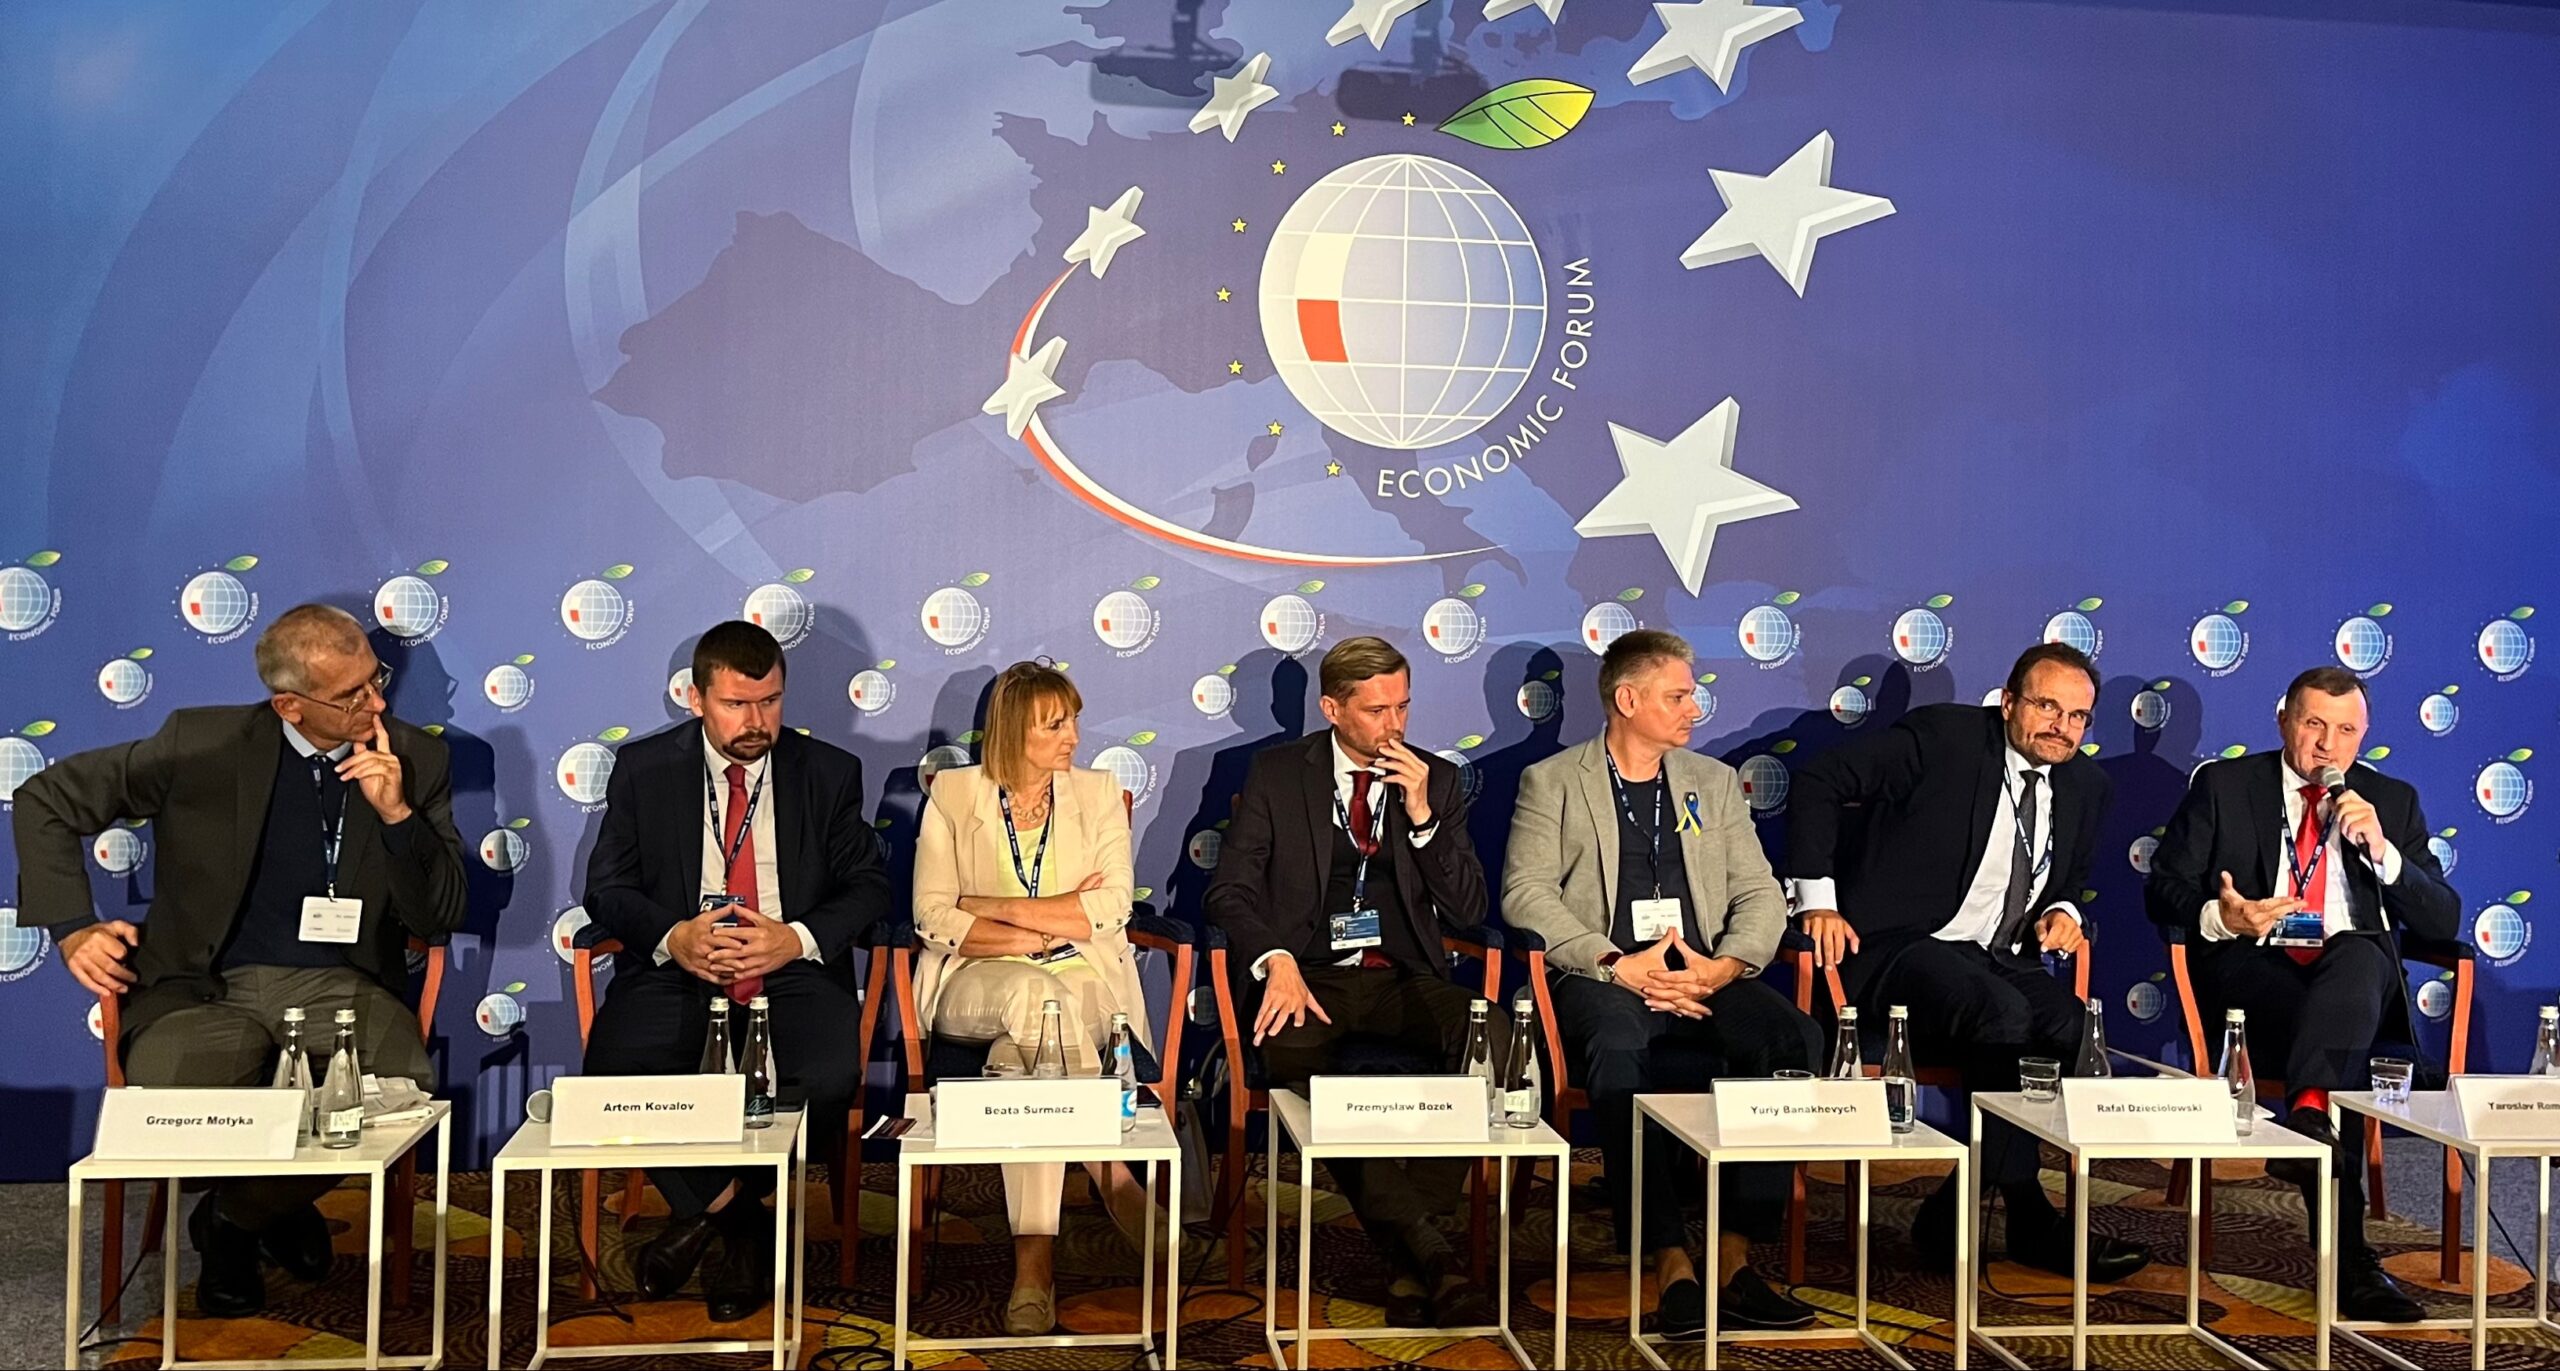 Partners of the EUCON Yaroslav Romanchuk and Andrii Romanchuk became speakers within the framework of the largest economic event in Central and Eastern Europe – the XXI Economic Forum in Karpaczu (XXI Forum Ekonomiczne w Karpaczu)